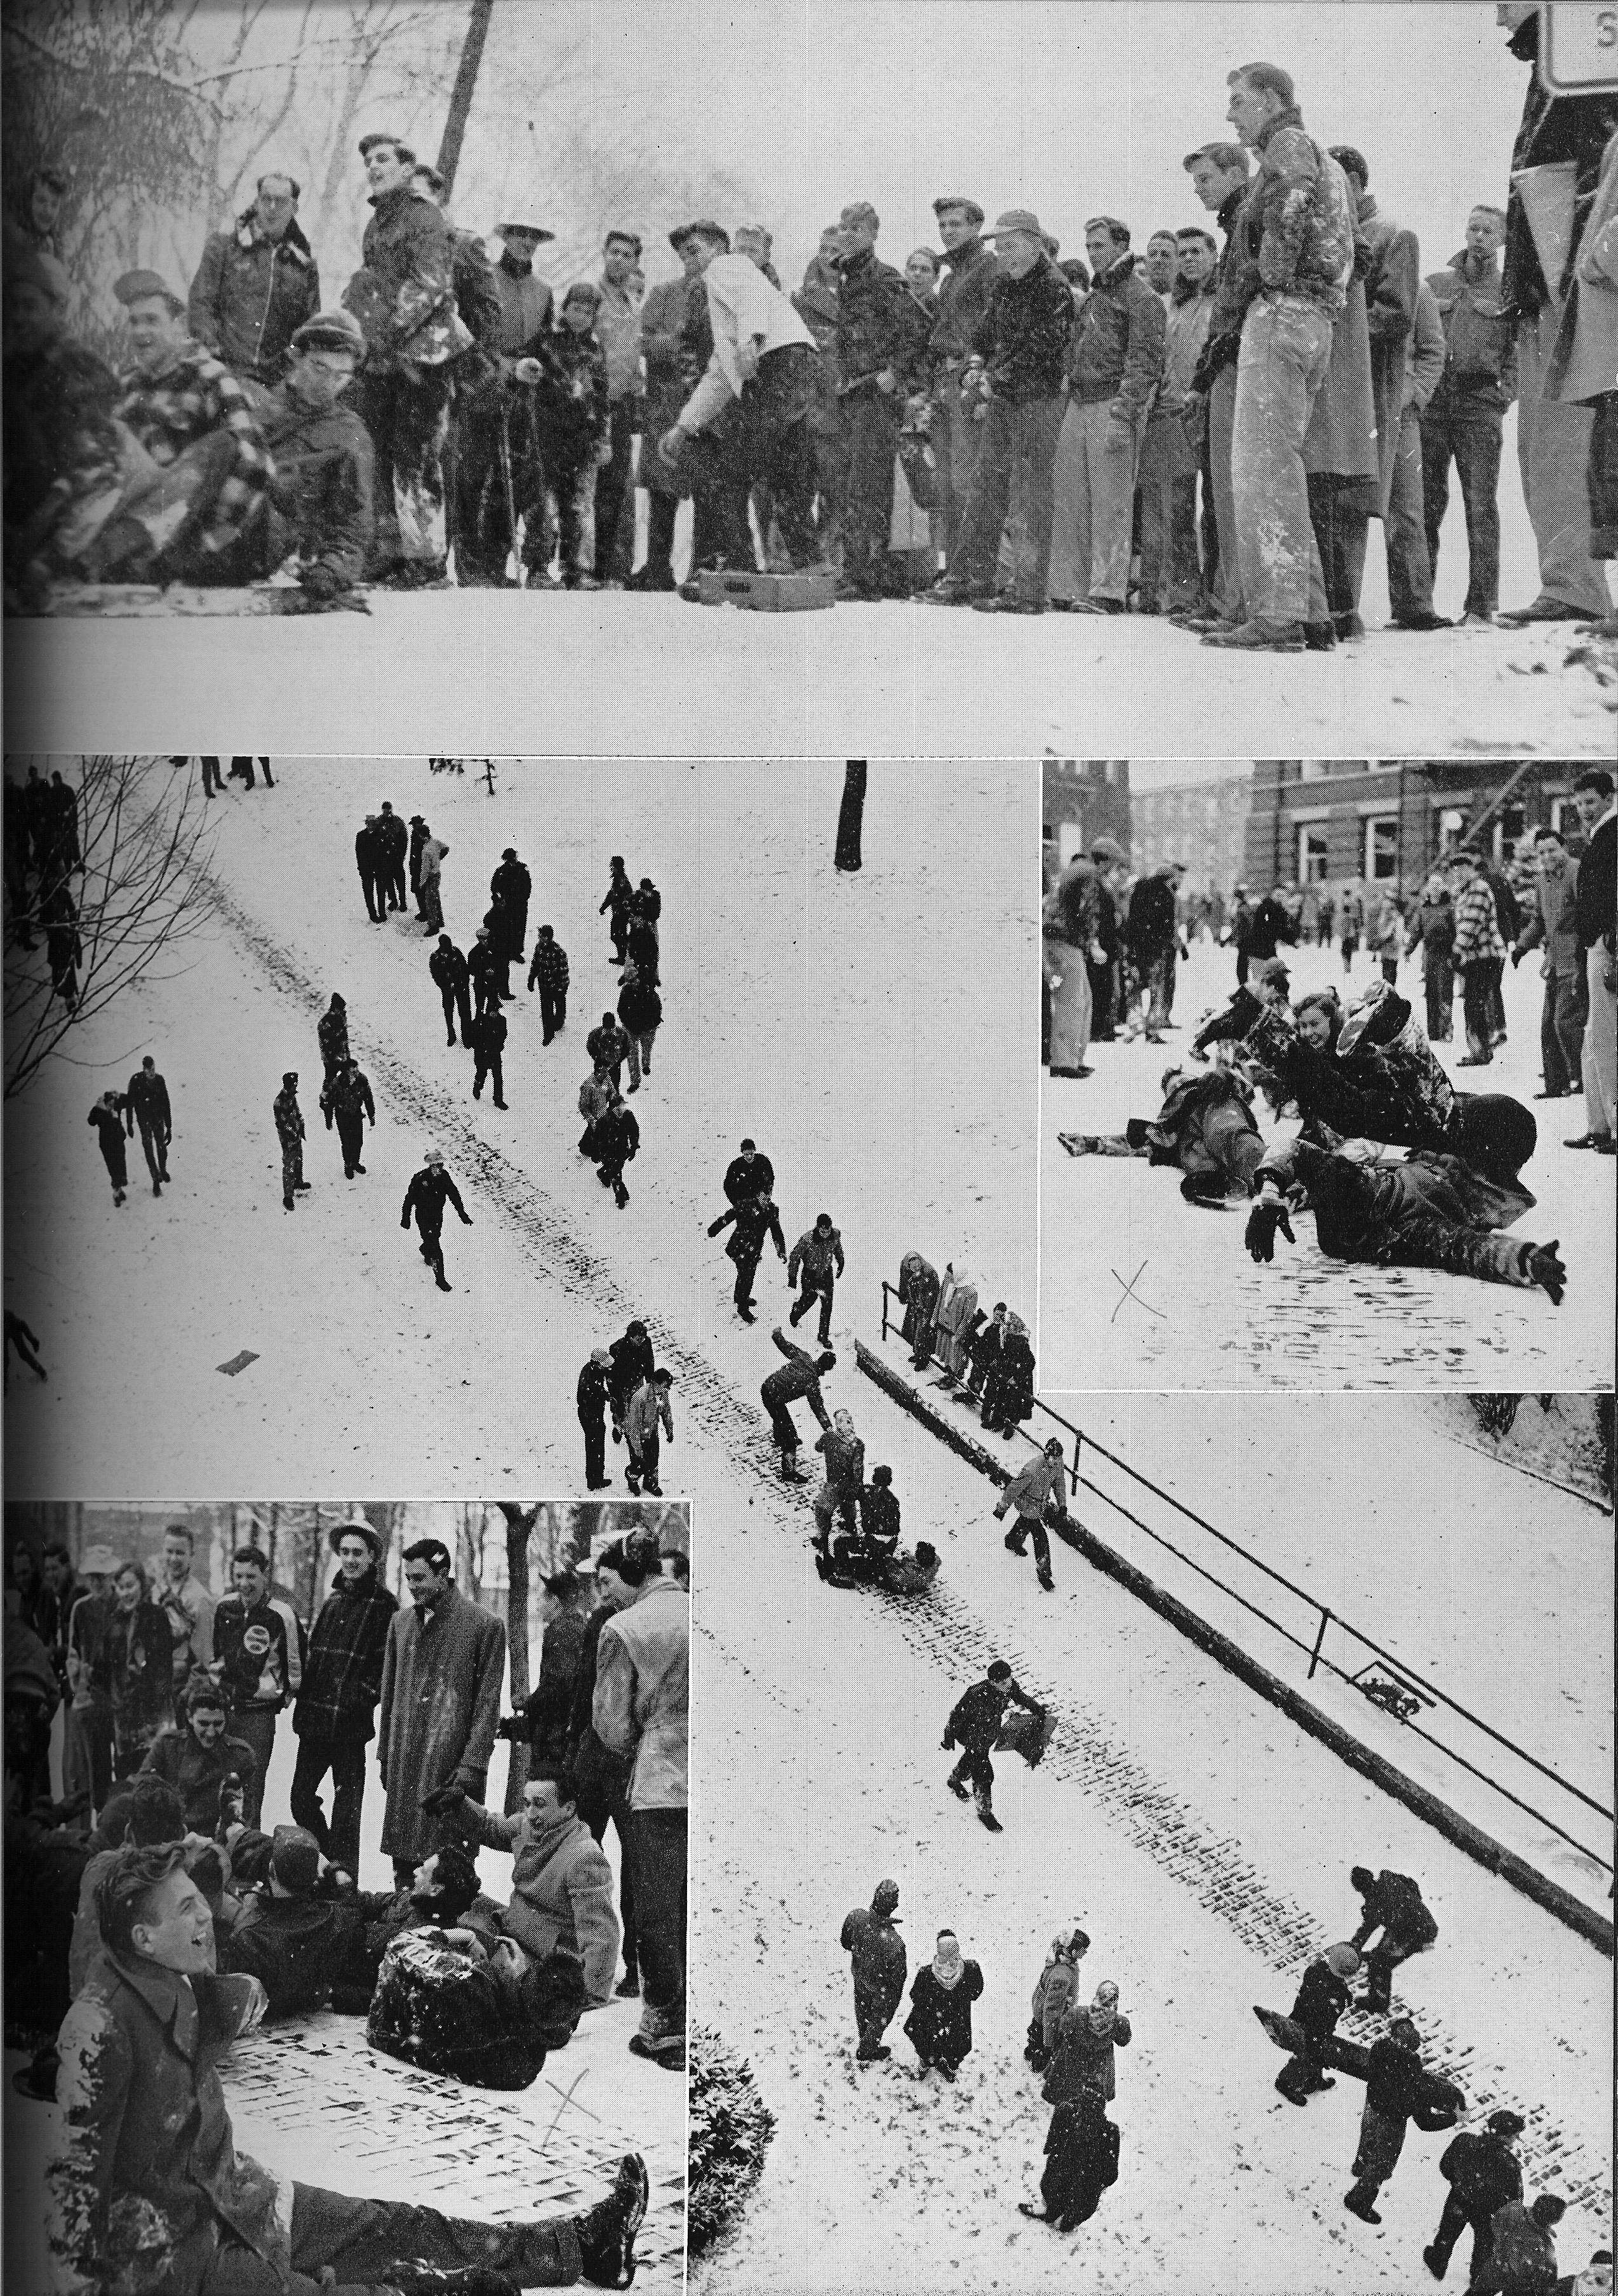 A series of photos showing students sledding and playing in the snow in the 1950s